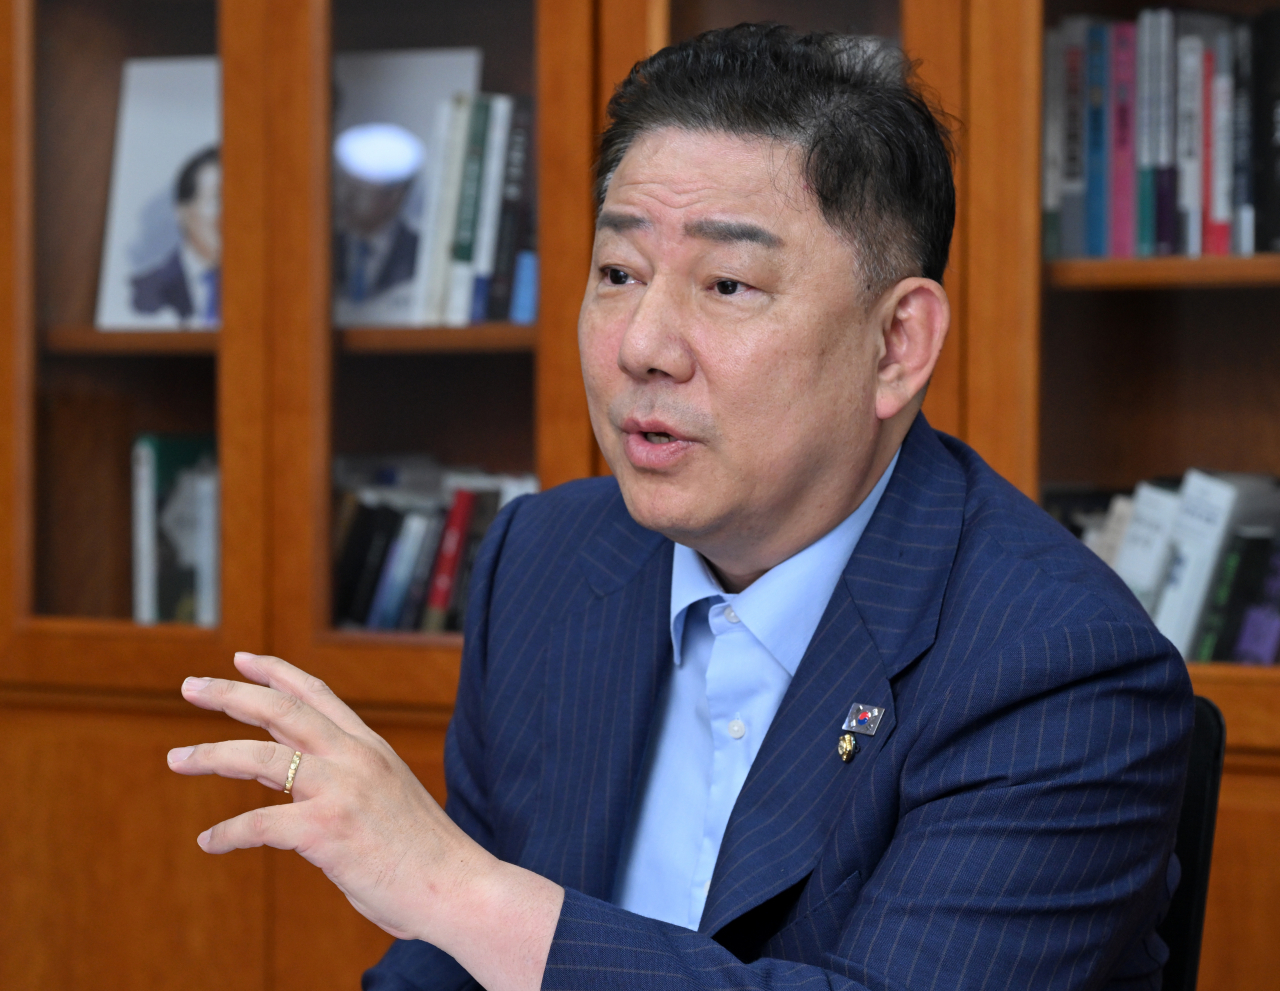 Rep. Kim Byung-kee of the Democratic Party of Korea speaks to The Korea Herald at his office in the National Assembly building in Yeouido, central Seoul, during a recent interview. (Im Se-jun/The Korea Herald)